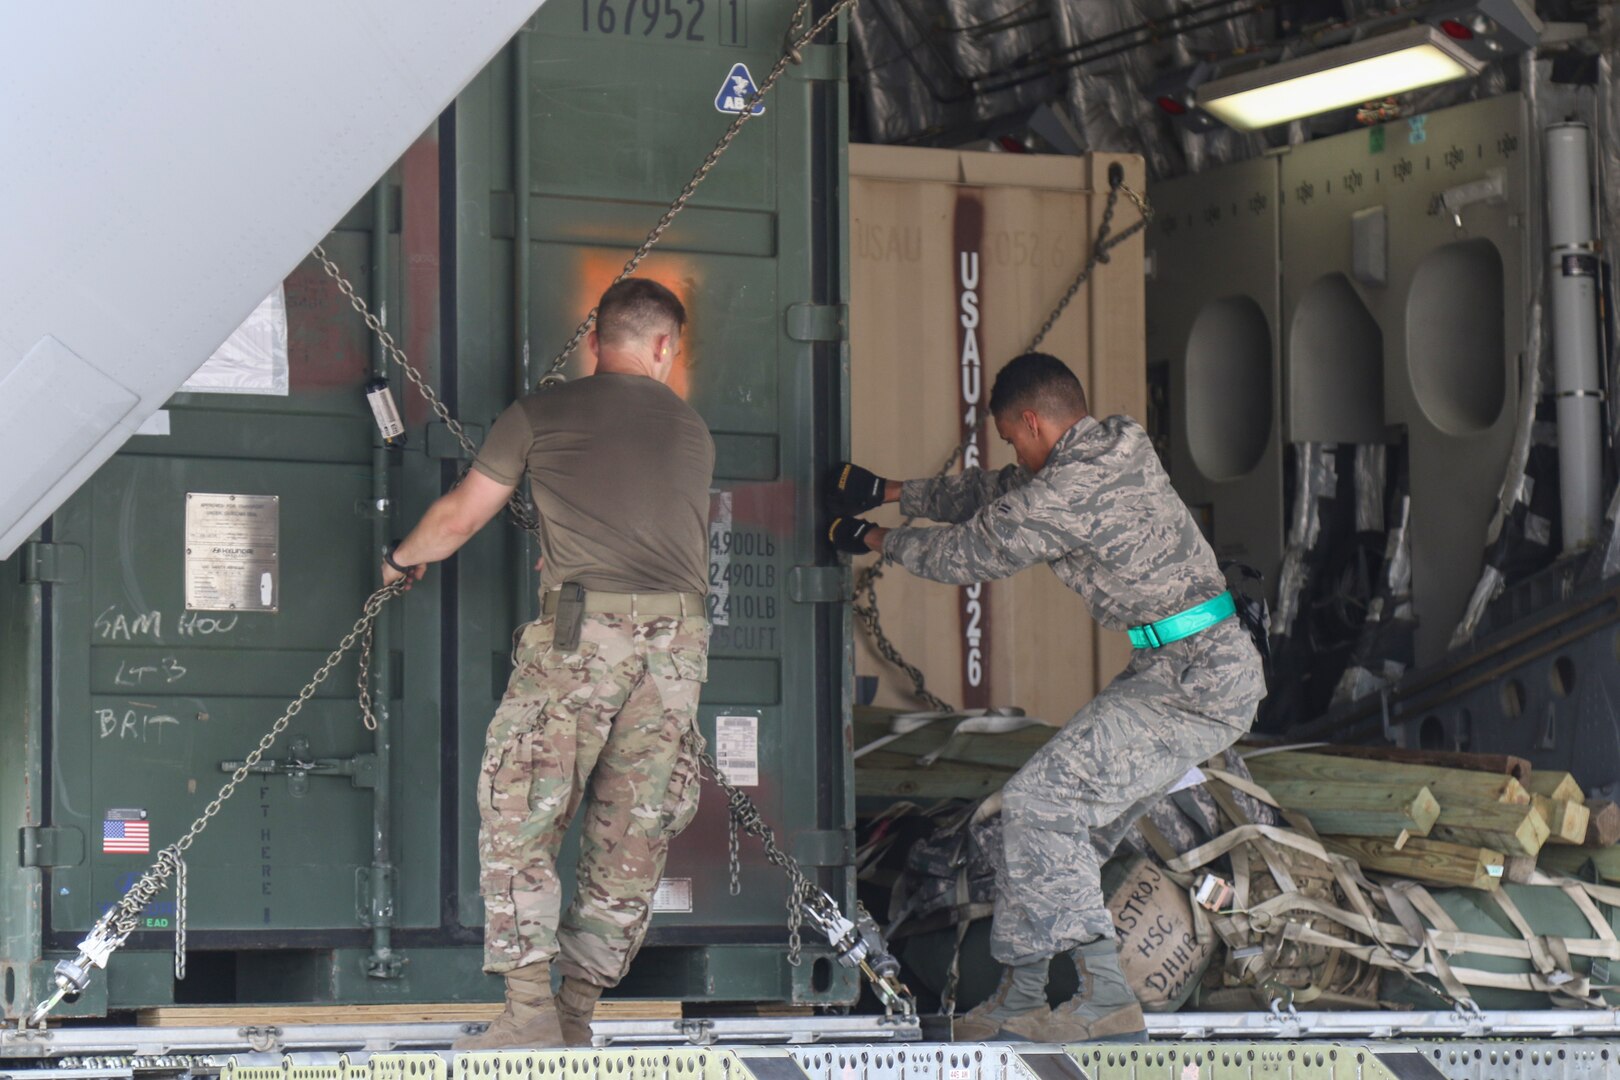 A Soldier with Task Force-51 and an Airman with the 502nd Logistics Readiness Squadron load equipment on a C-17 Globemaster III cargo plane in preparation to support exercise Vigilant Guard-Ohio at Joint Base San Antonio-Kelly Field Annex in San Antonio Aug 4. VG-Ohio is held by U.S. Northern Command and the National Guard Bureau that will test the state's emergency response capabilities with a simulated attack.